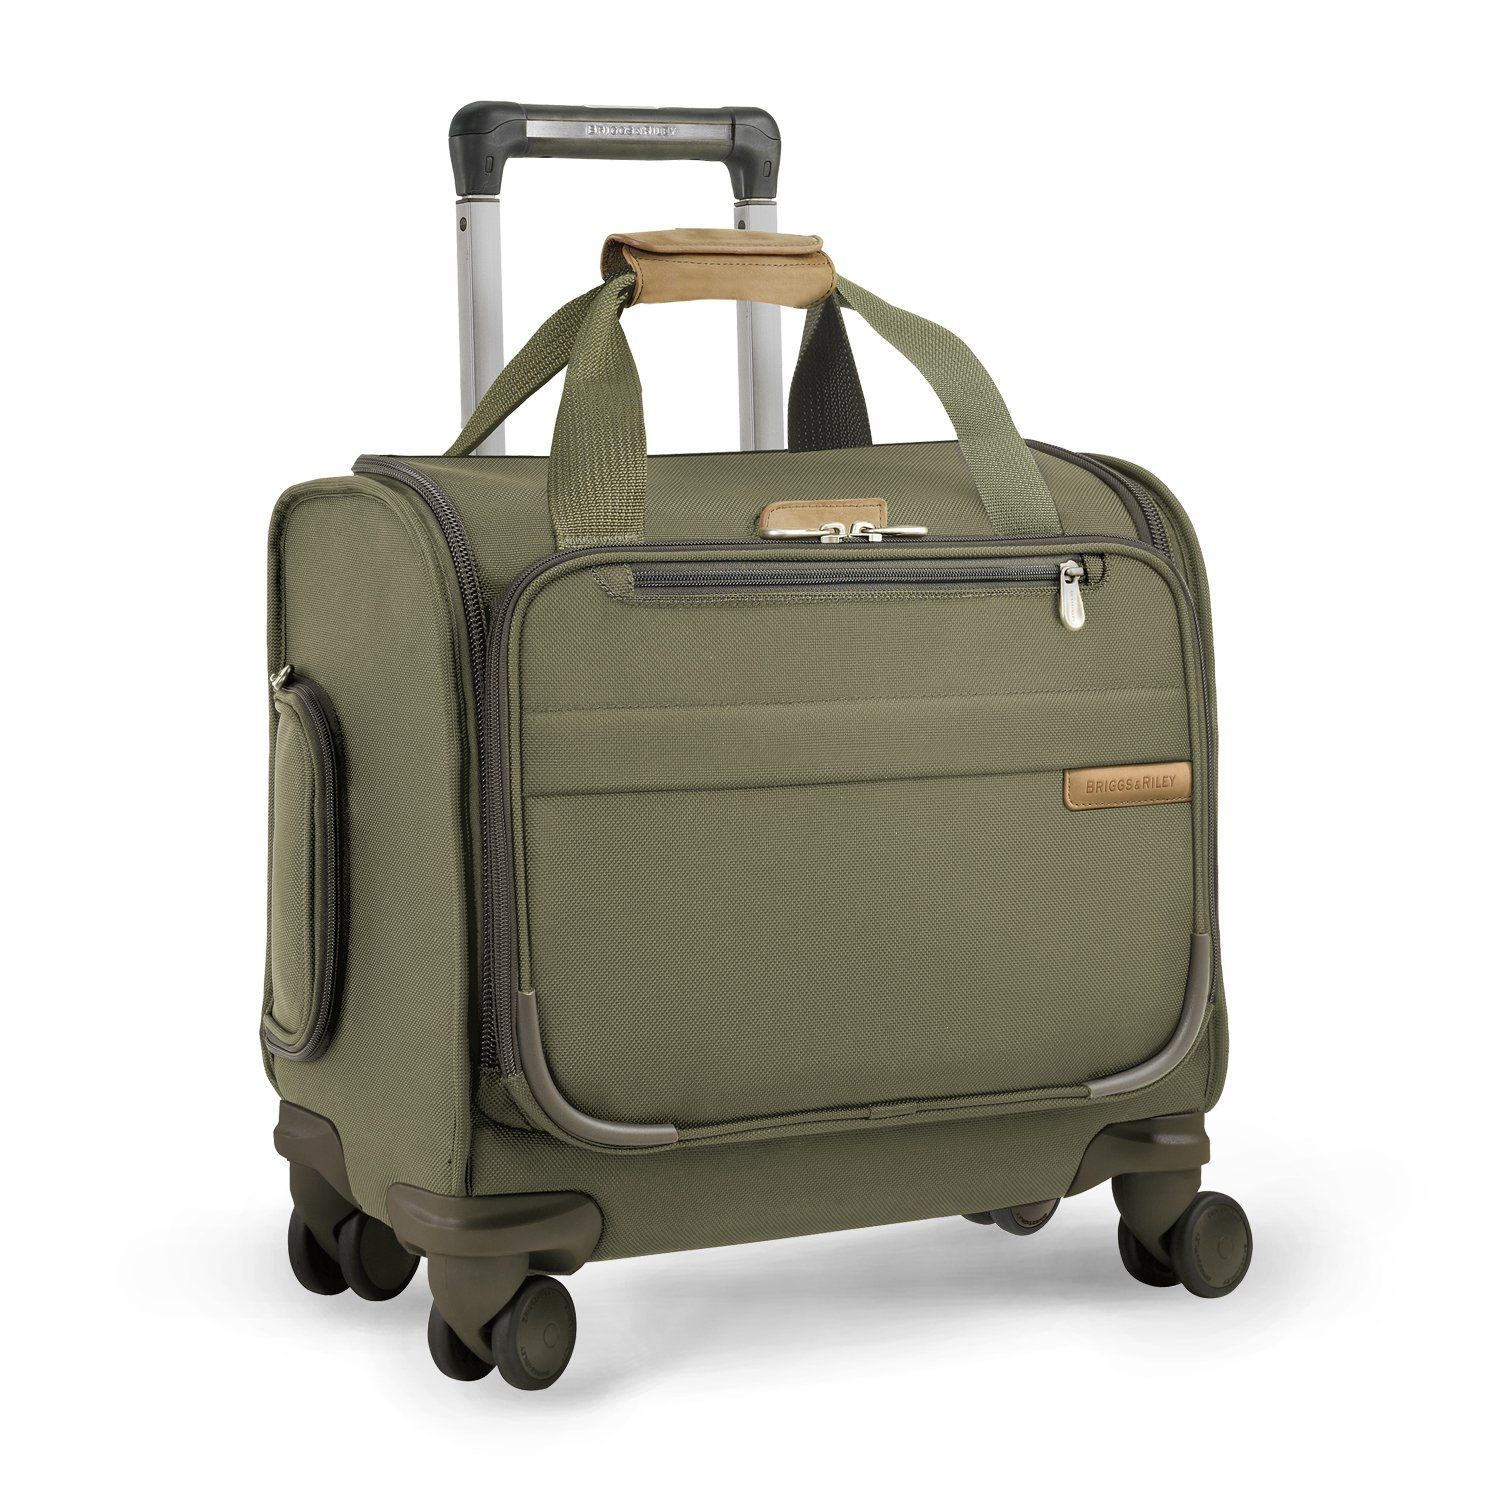 The versatility of a Rolling Cabin Bag and the effortless 360° navigation of four double swivel wheels, all rolled into one. Perfect for carrying on board and laying flat under most airline seats or in the overhead compartment. Key features include: Front gusseted organiser compartment with a padded pocket for iPad® or tablet and additional room for power adapters/cords, magazines and files. Roomy, open-mouth main compartment allows bag to be easily packed and organised - open-mouth main compartment allows bag to be easily packed and organised. Easily access water bottle zipper pocket. Outsider® handle provides flat interior surface for wrinkle-free packing.